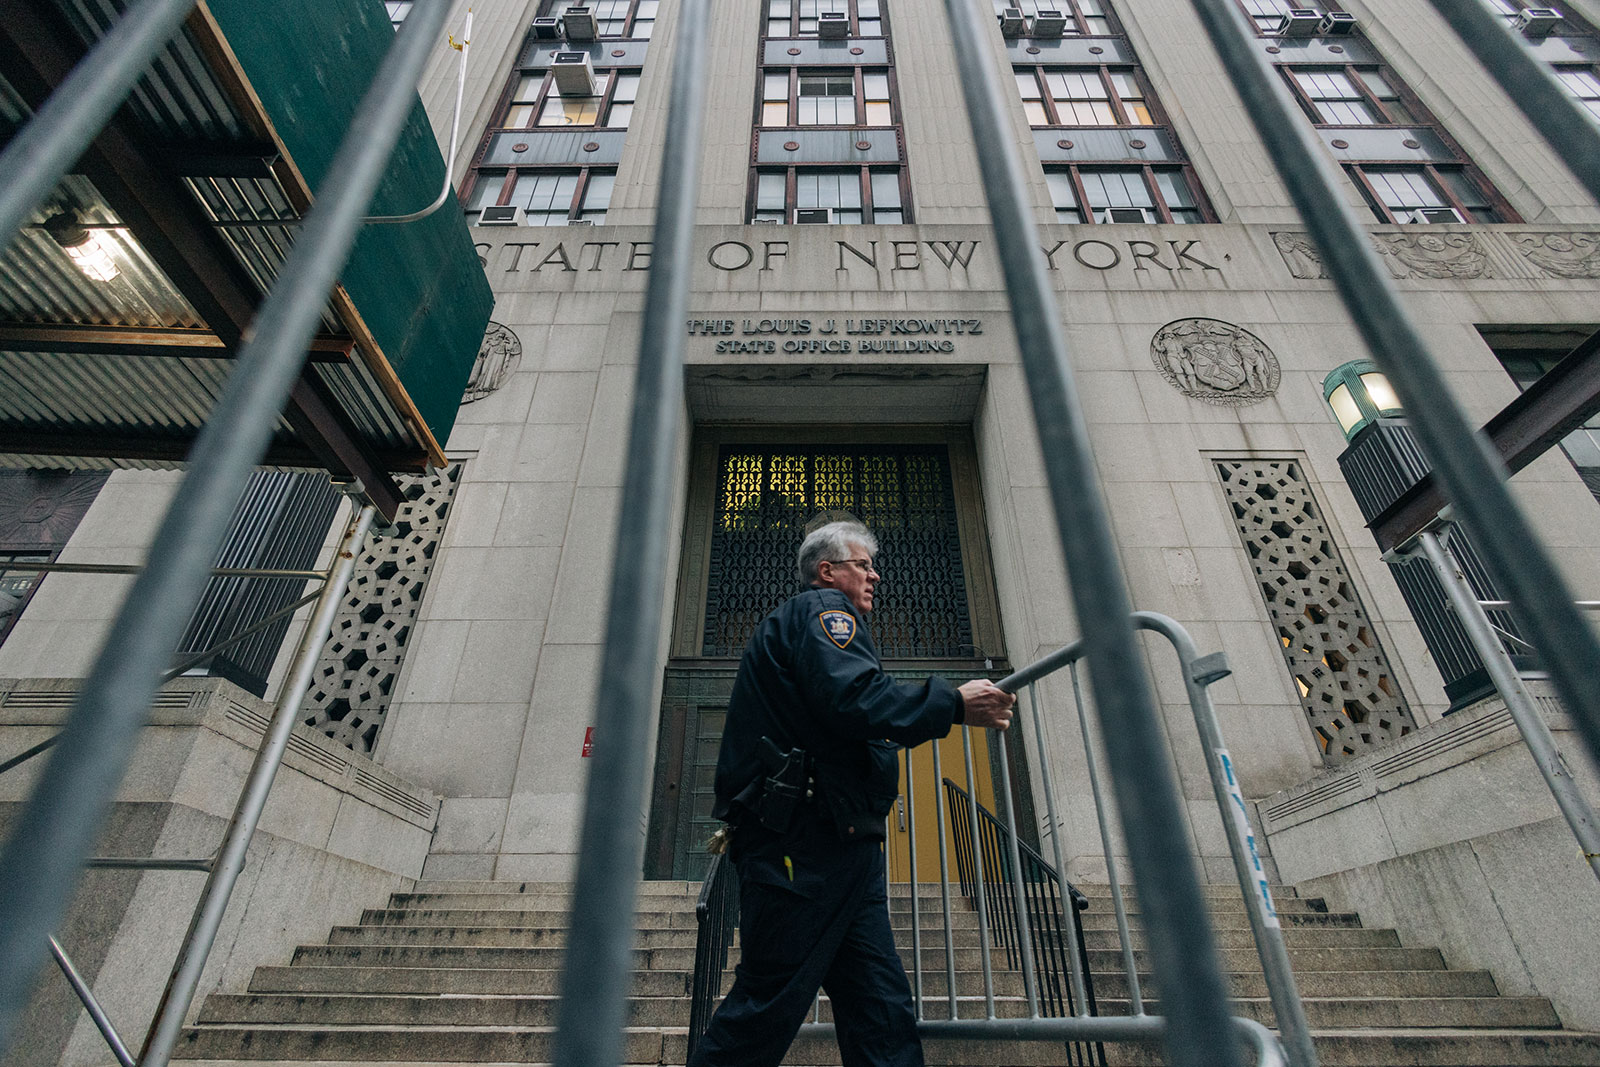 A New York police officer sets up a fence outside the Manhattan Criminal Court in New York on March 22.